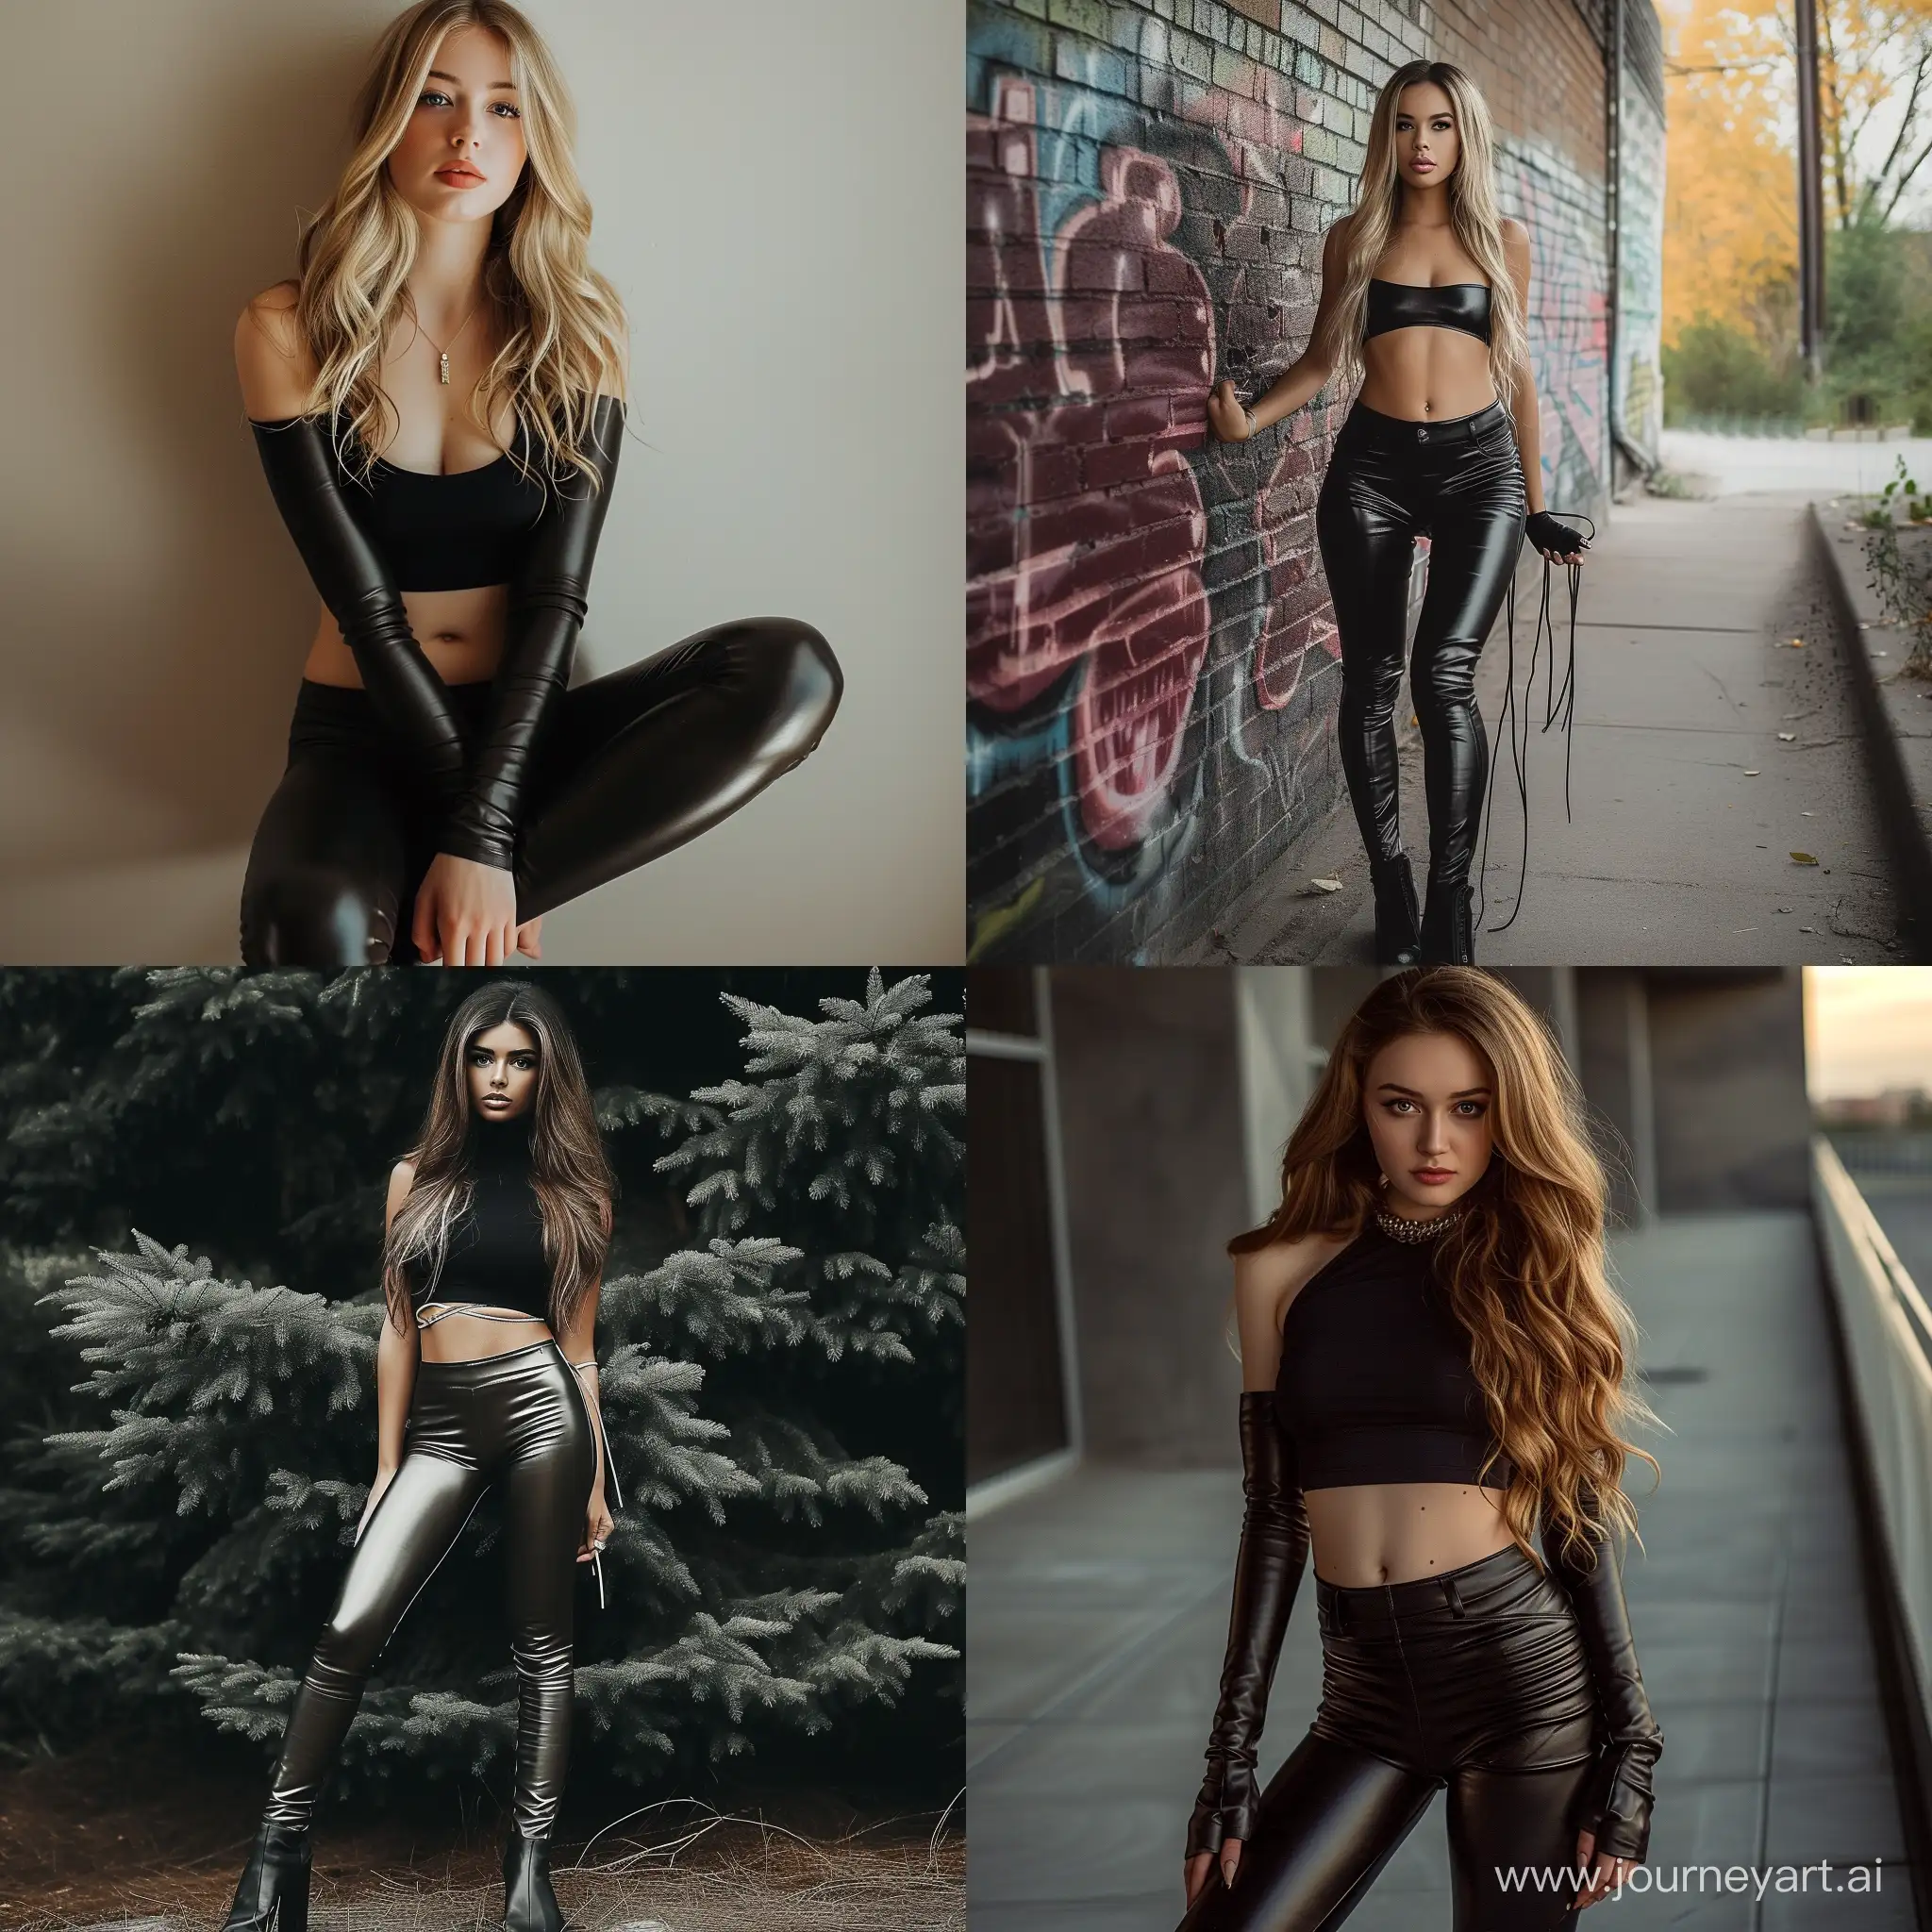 Sultry-Woman-Flaunting-Leather-Leggings-in-Urban-Vibes-Photoshoot